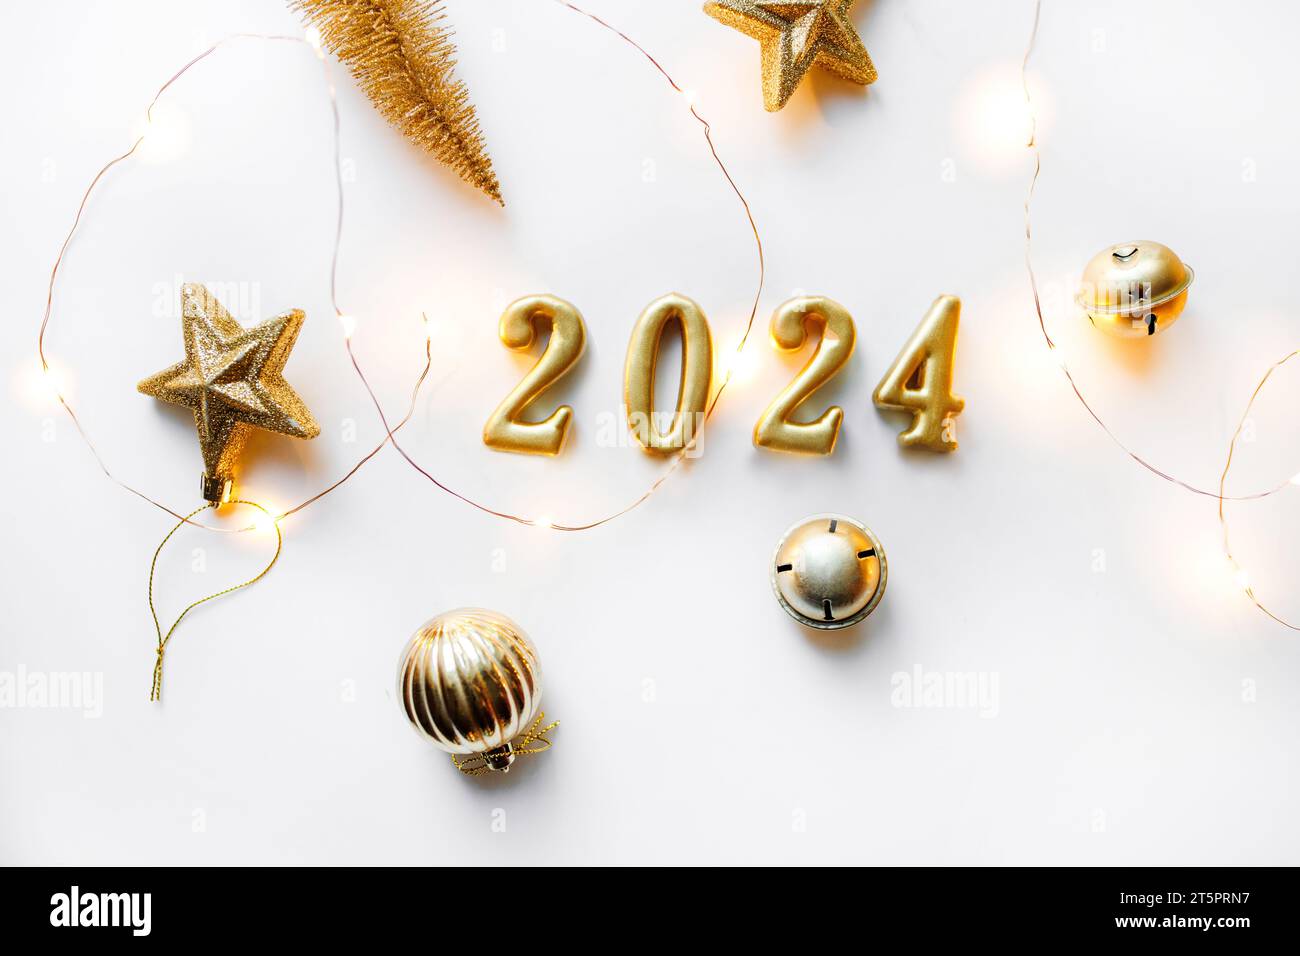 year 2024 golden symbol. Happy New Year 2024 poster. Christmas background with gold 2024 numbers. Stock Photo